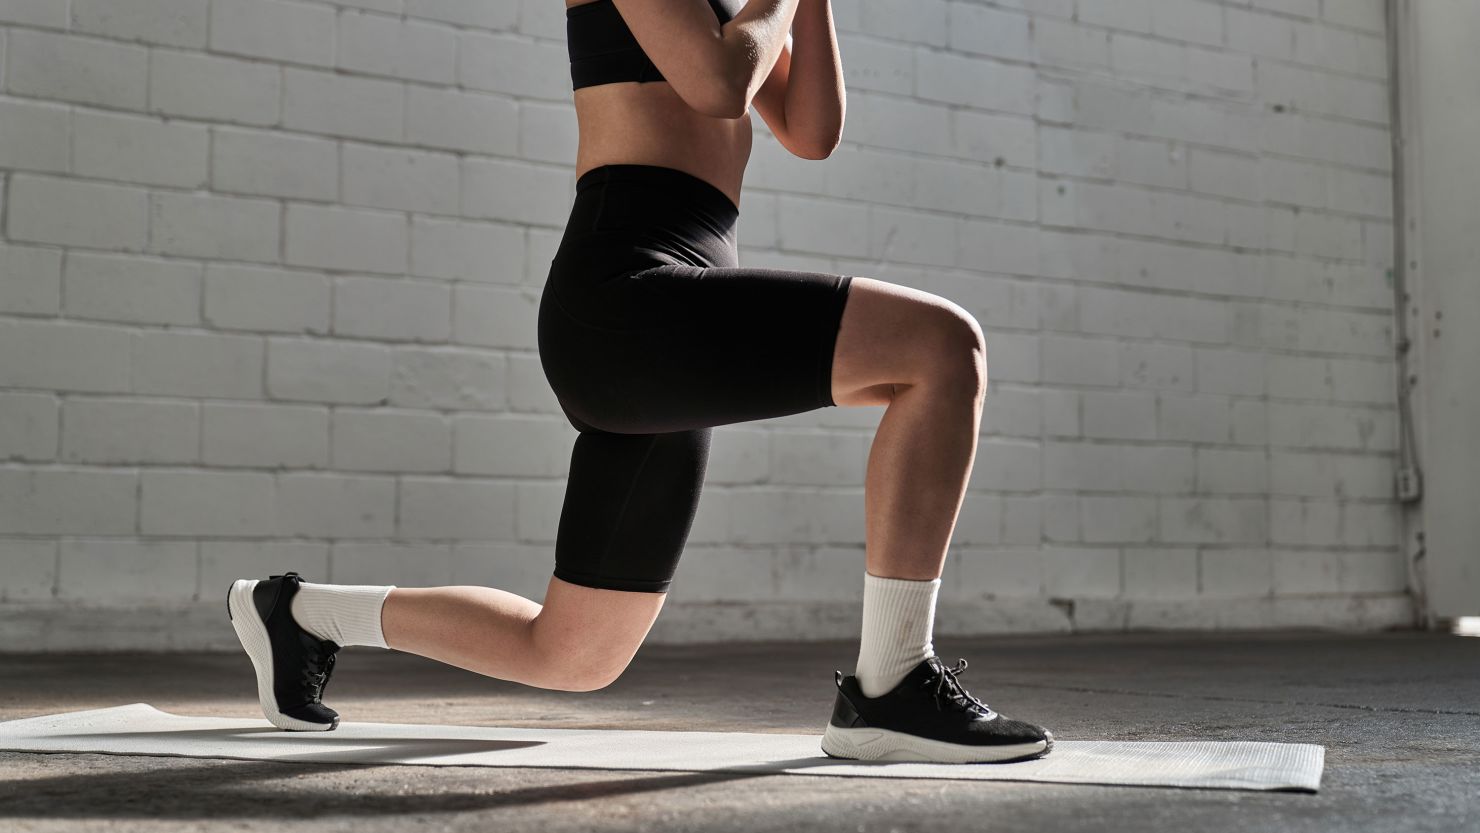 The reverse lunge can be an effective way to reduce pain and strengthen the muscles around your knees.